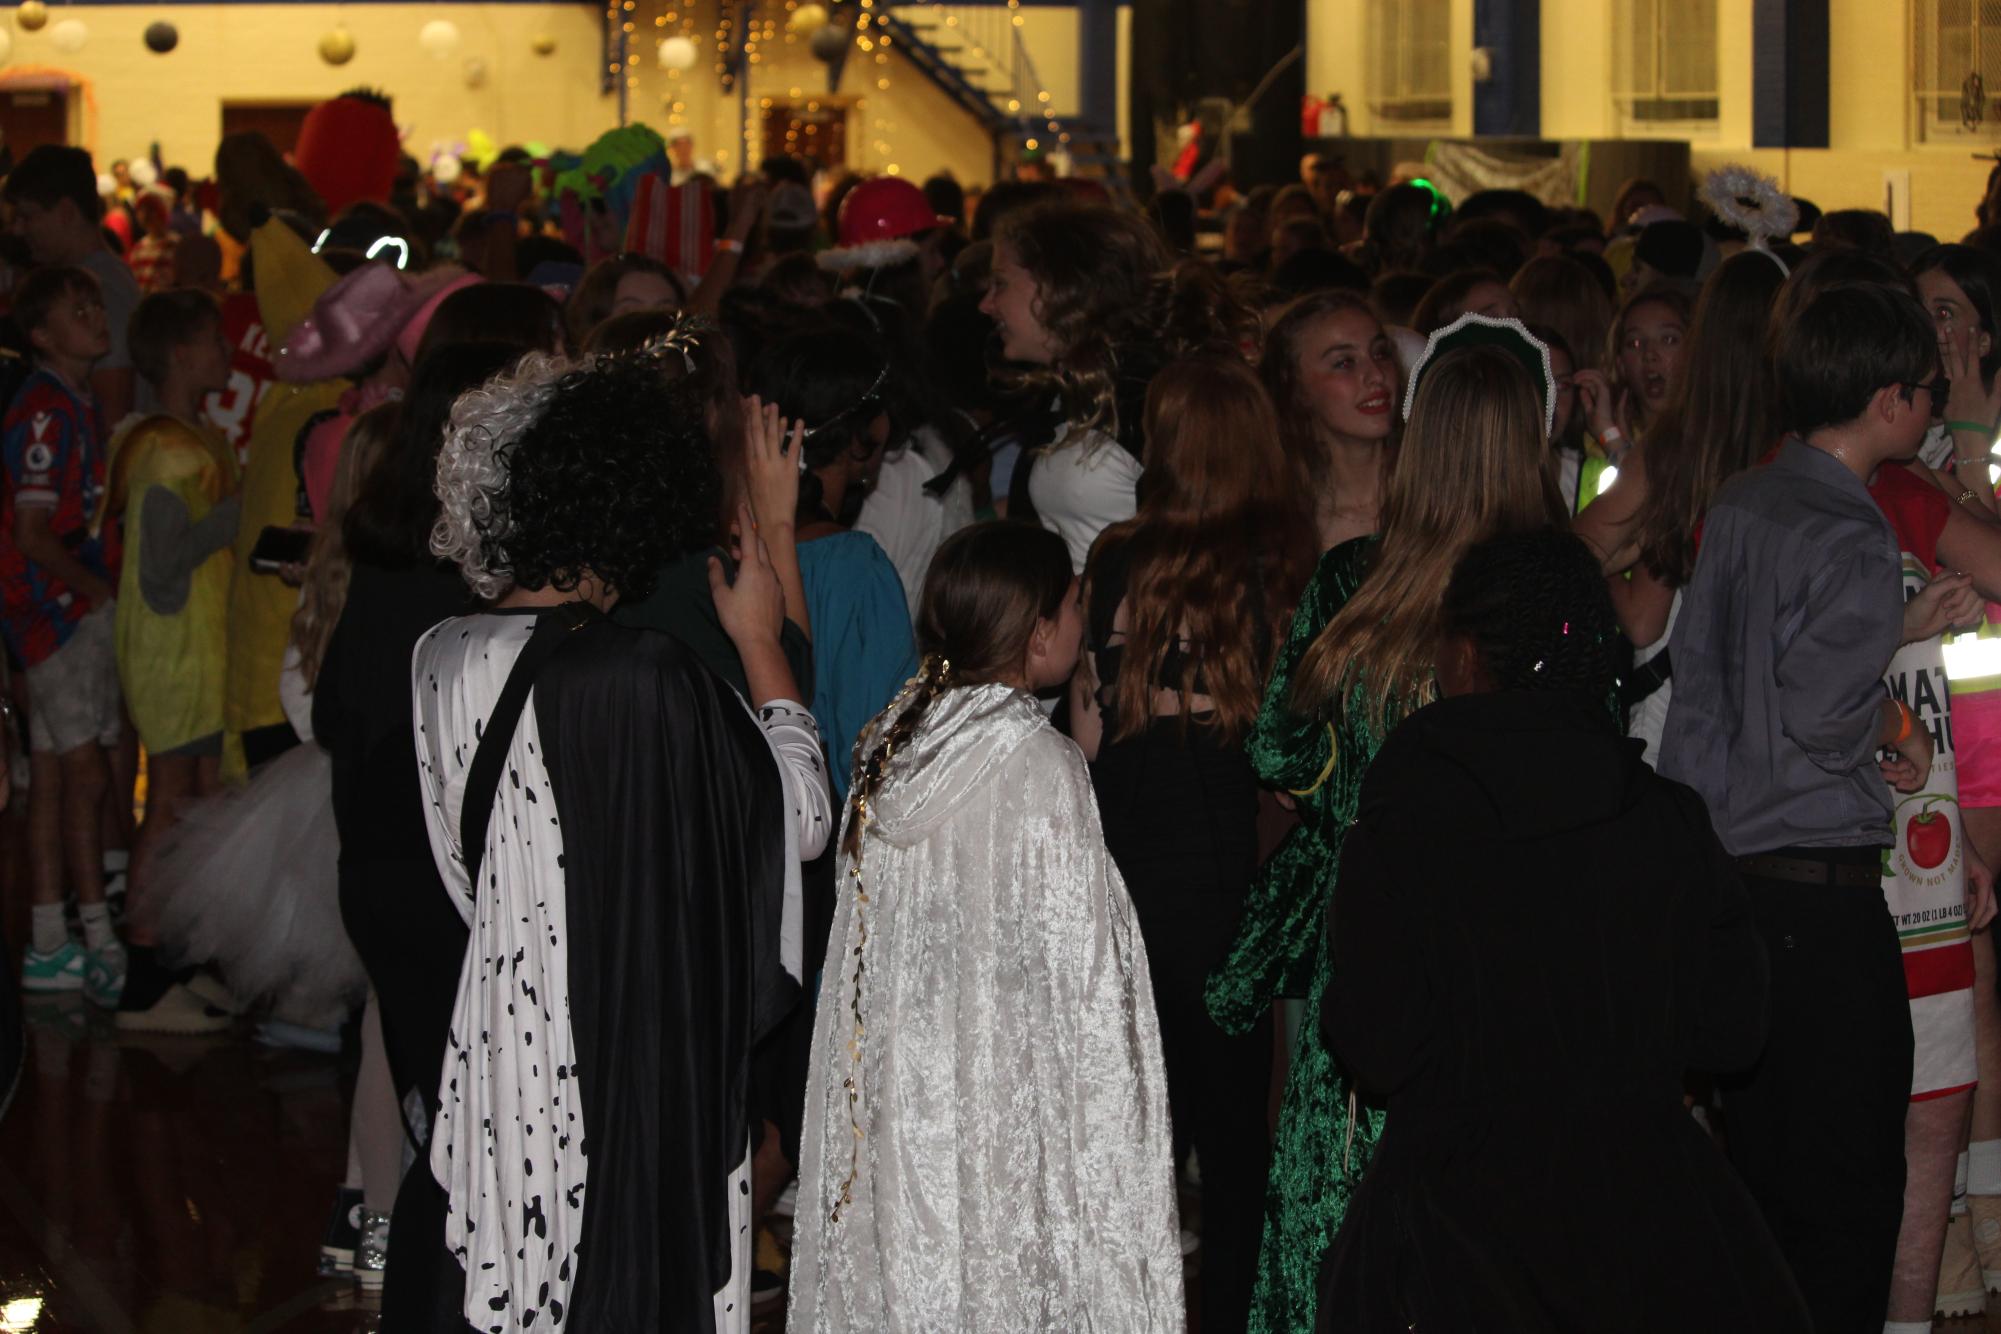 Jr High students Boogied the night away during the Oct 27. Boogie Bash. Students dressed up in costume for the dance which took place in the Jr High gym.